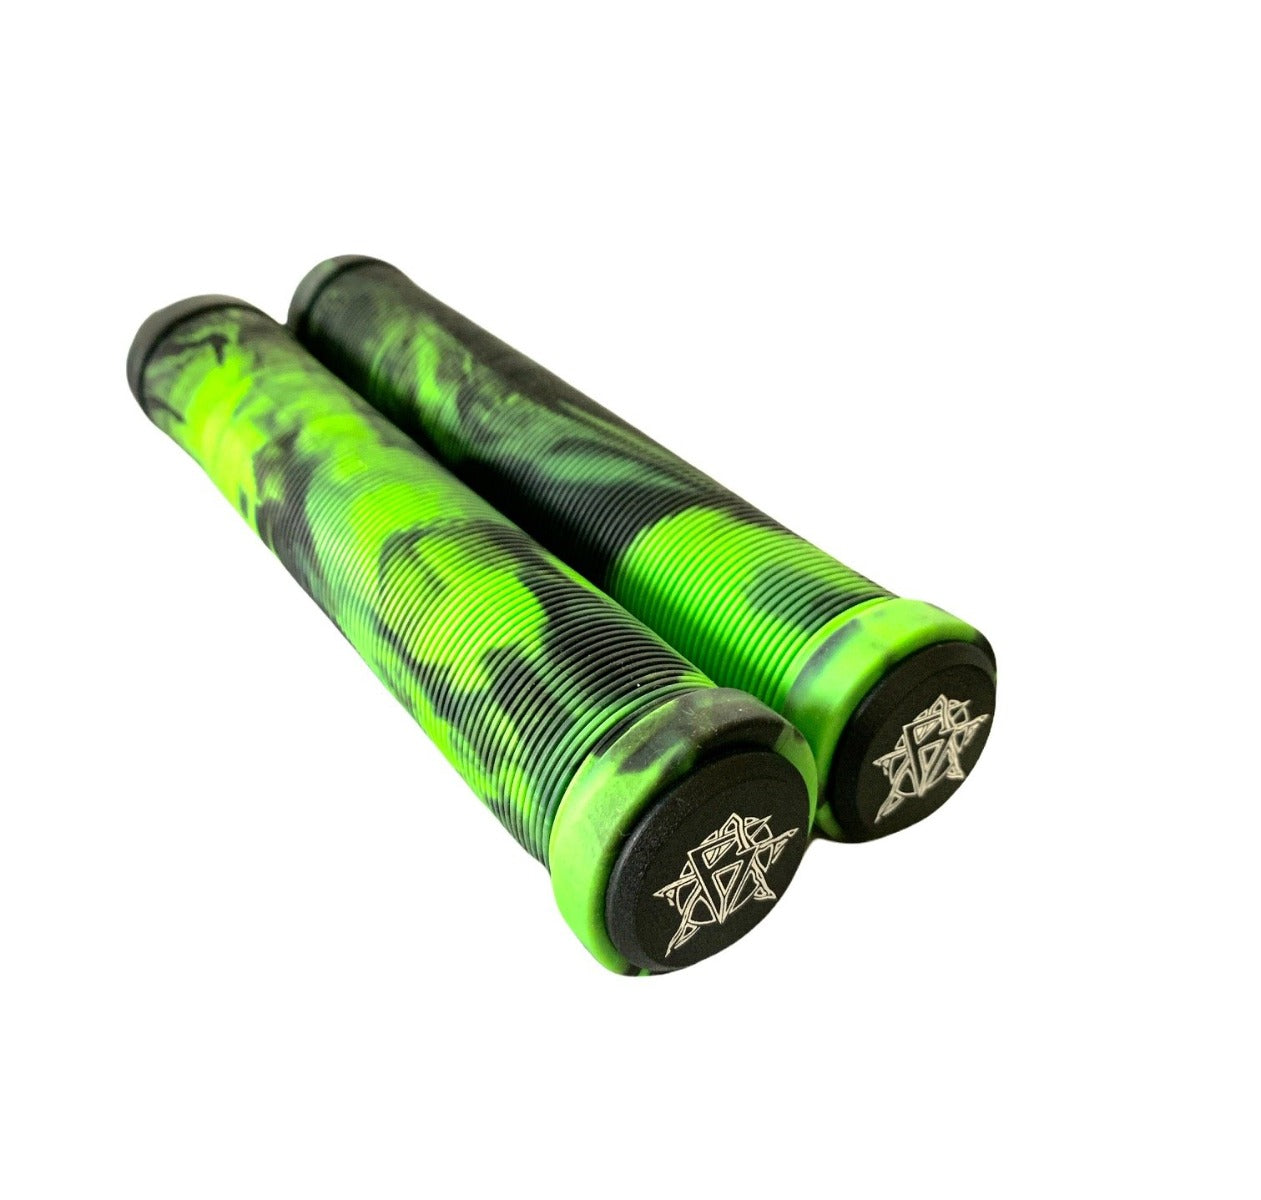 Revolution Fused Black / Green Stunt Scooter Grips - 172mm - Pair 